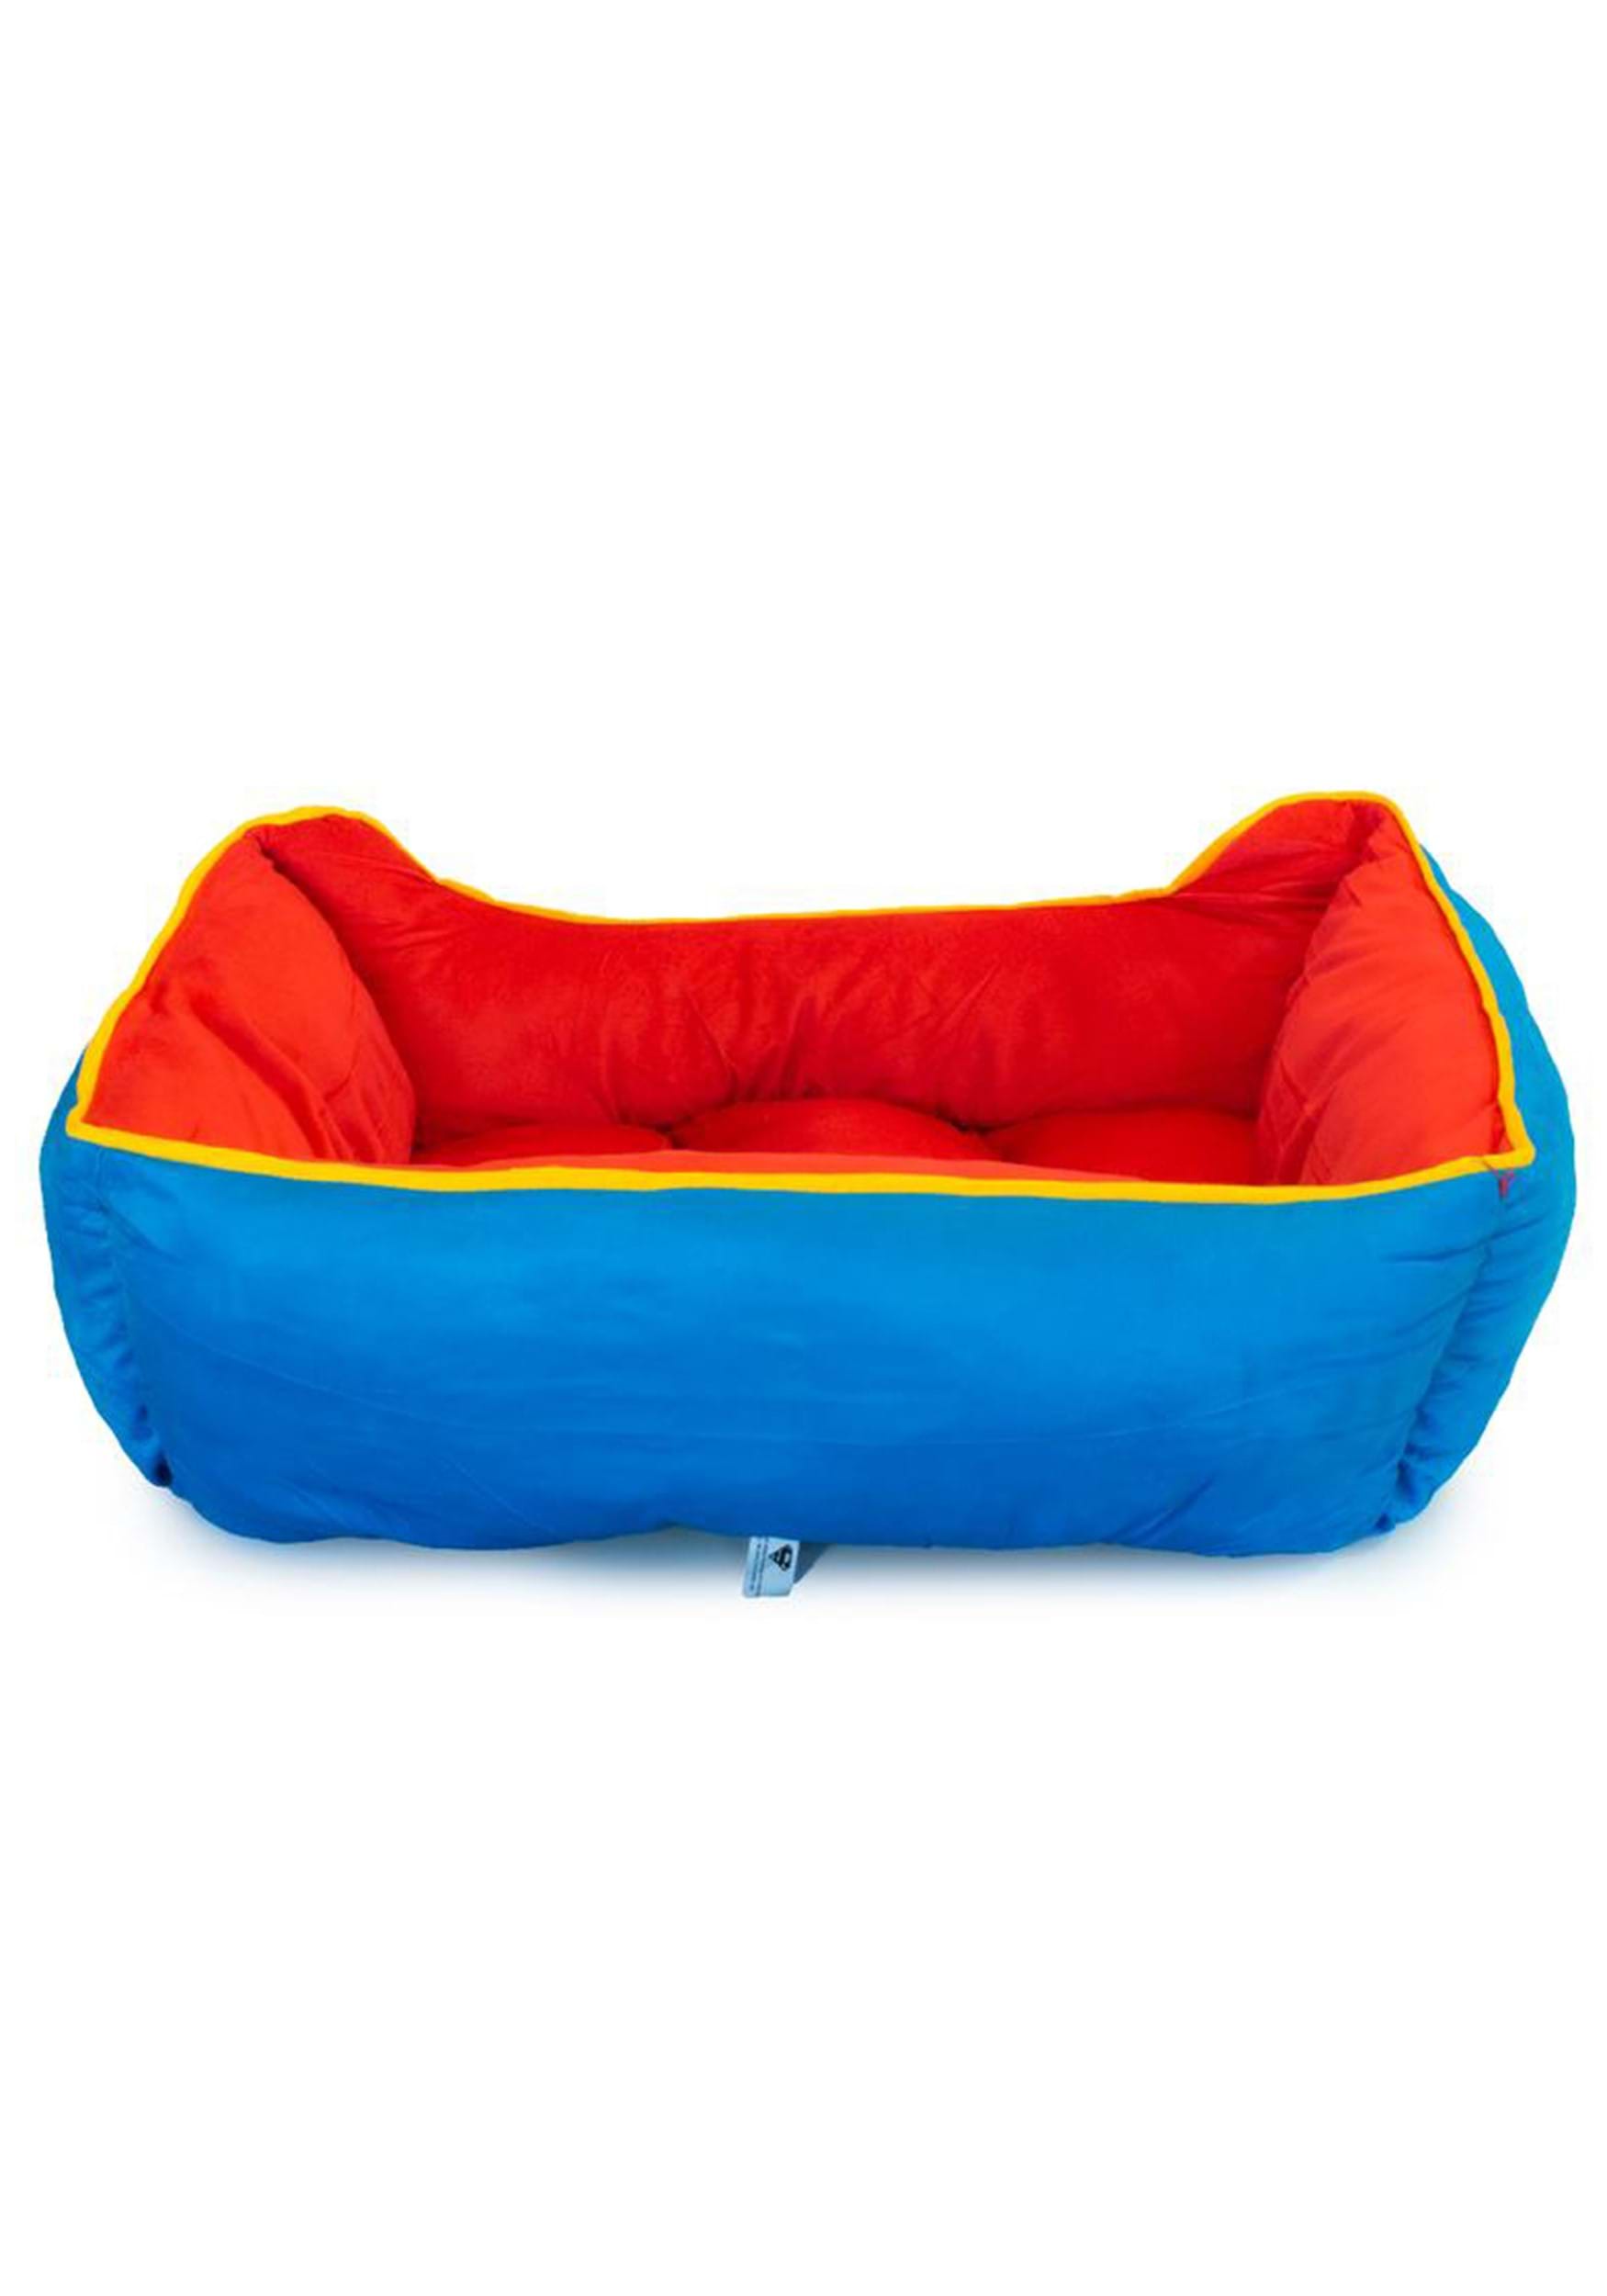 Red And Blue Superman Pet Bed